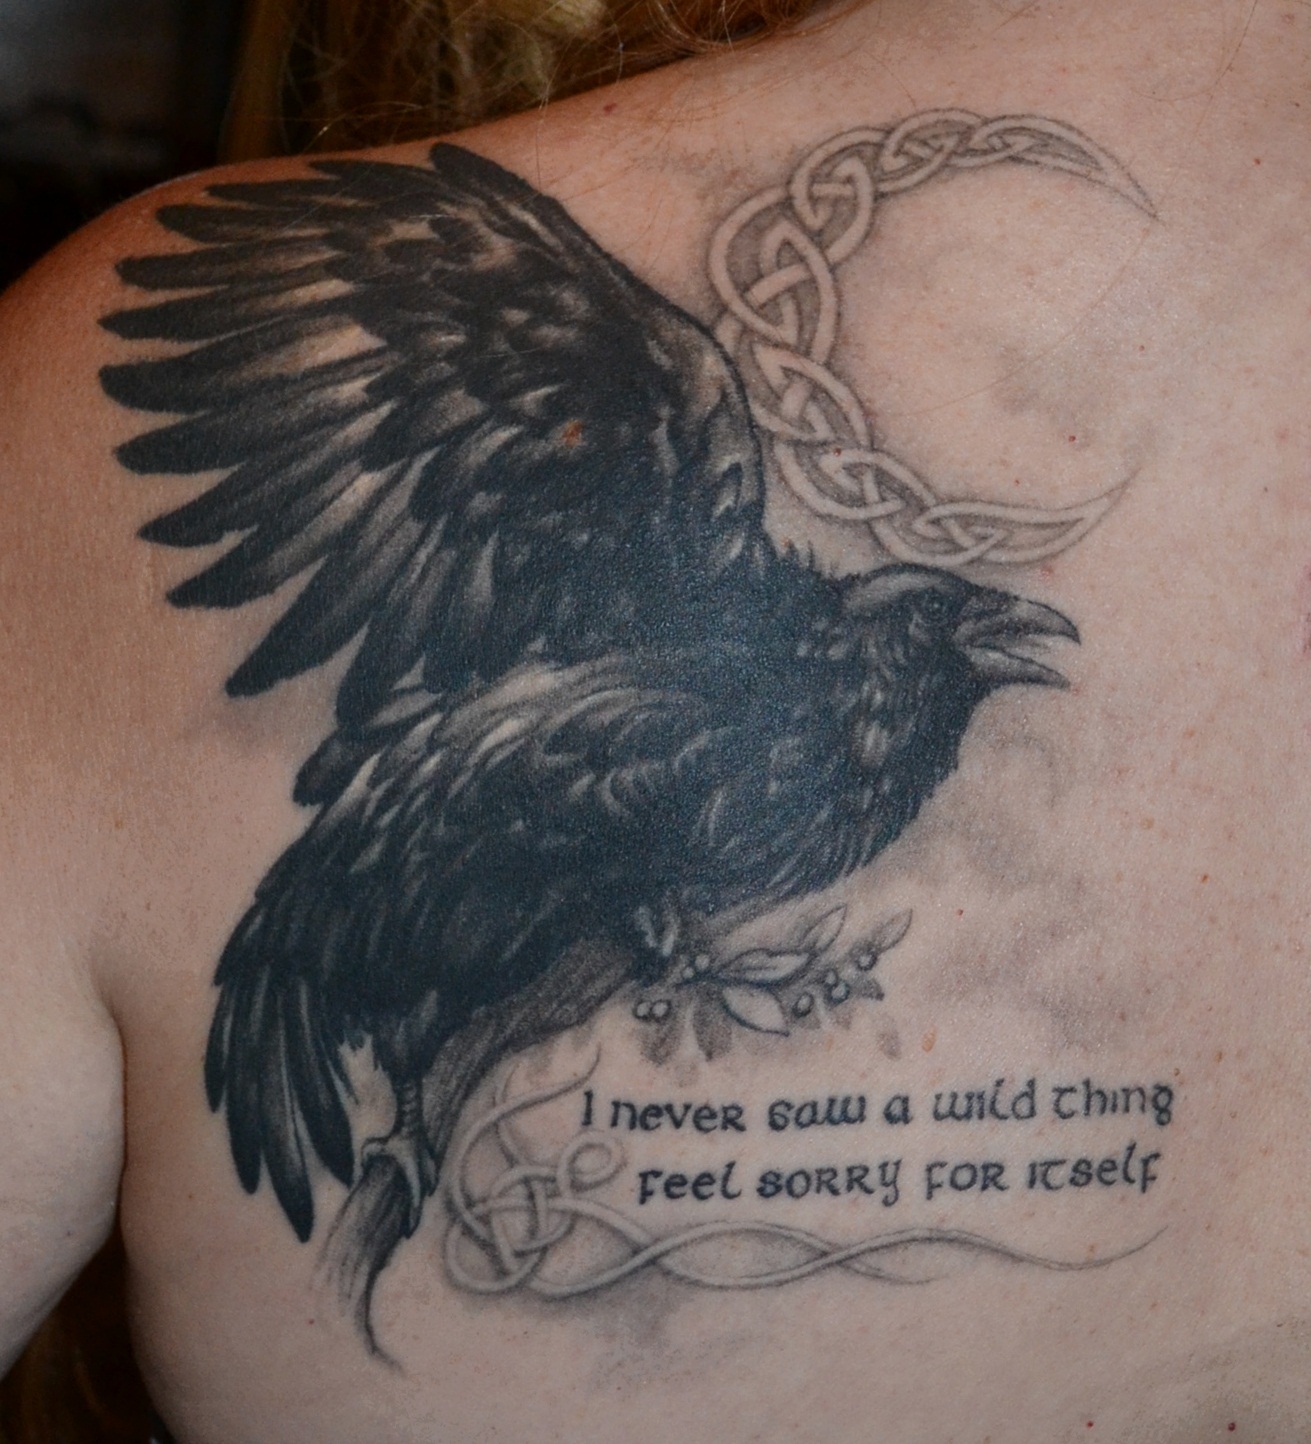 Raven Tattoos Designs, Ideas and Meaning | Tattoos For You